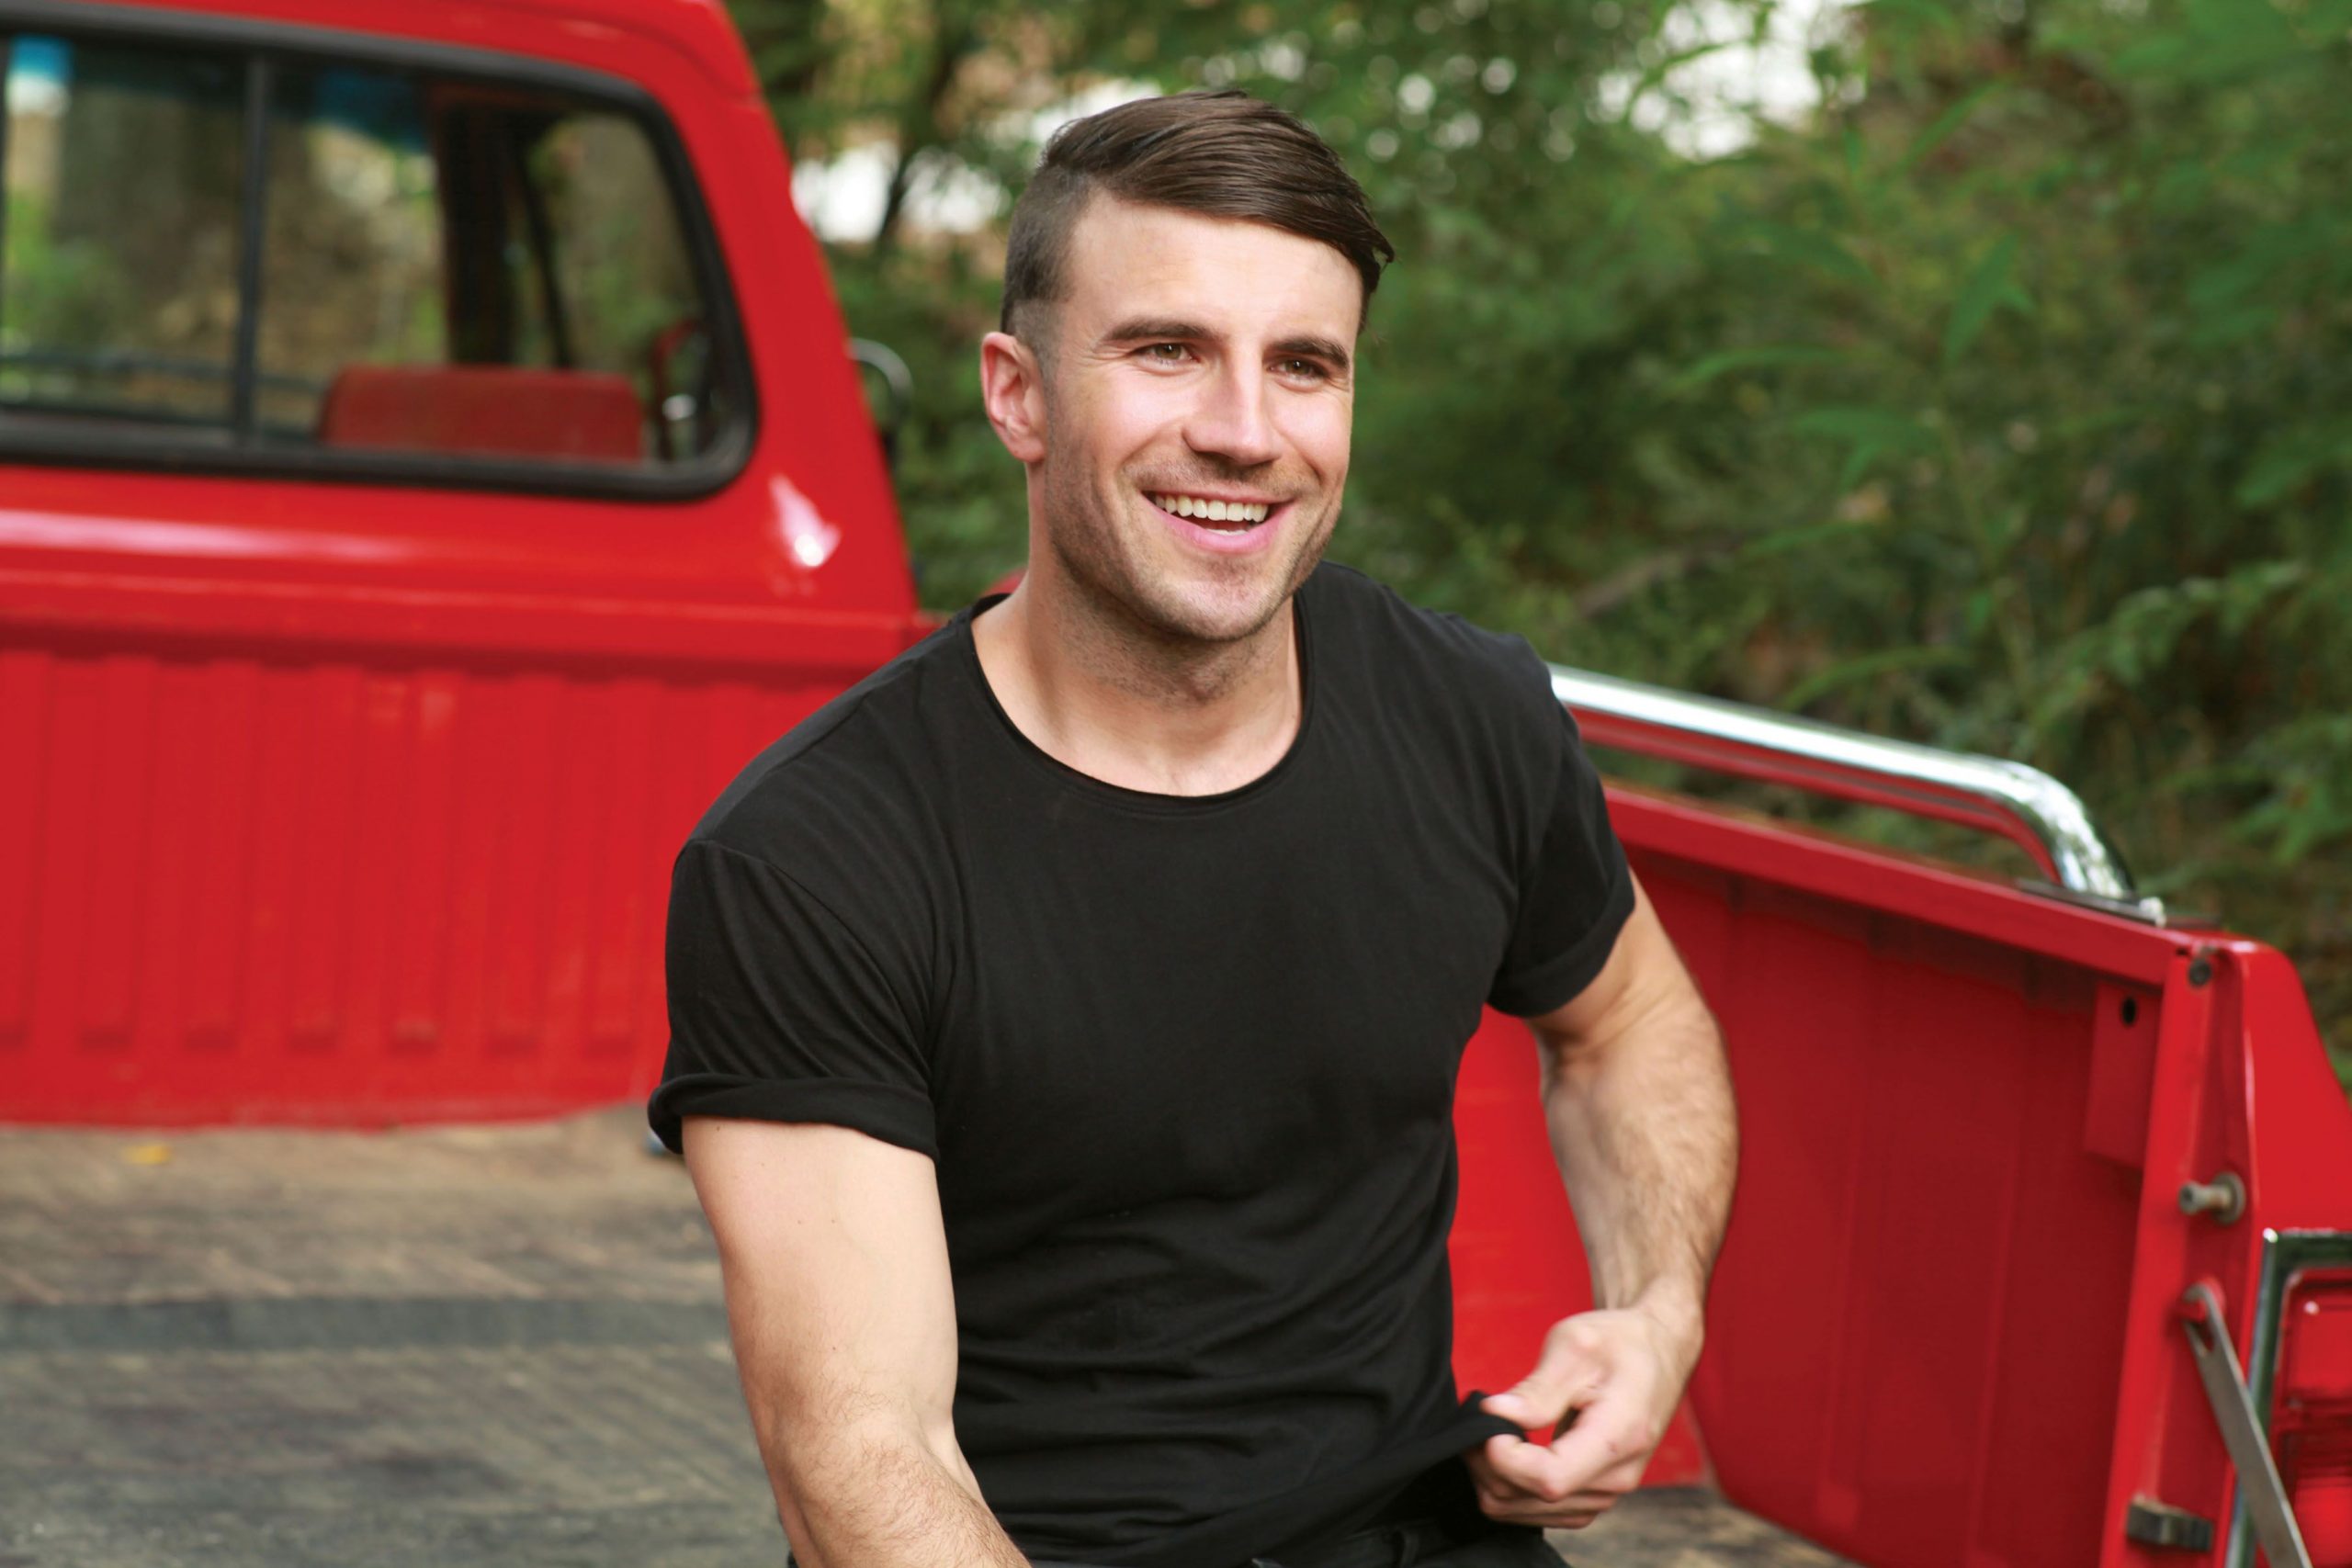 SAM HUNT IS AMONG THE FINAL NOMINEES FOR THIS YEAR’S ACM NEW ARTIST OF THE YEAR AWARD.